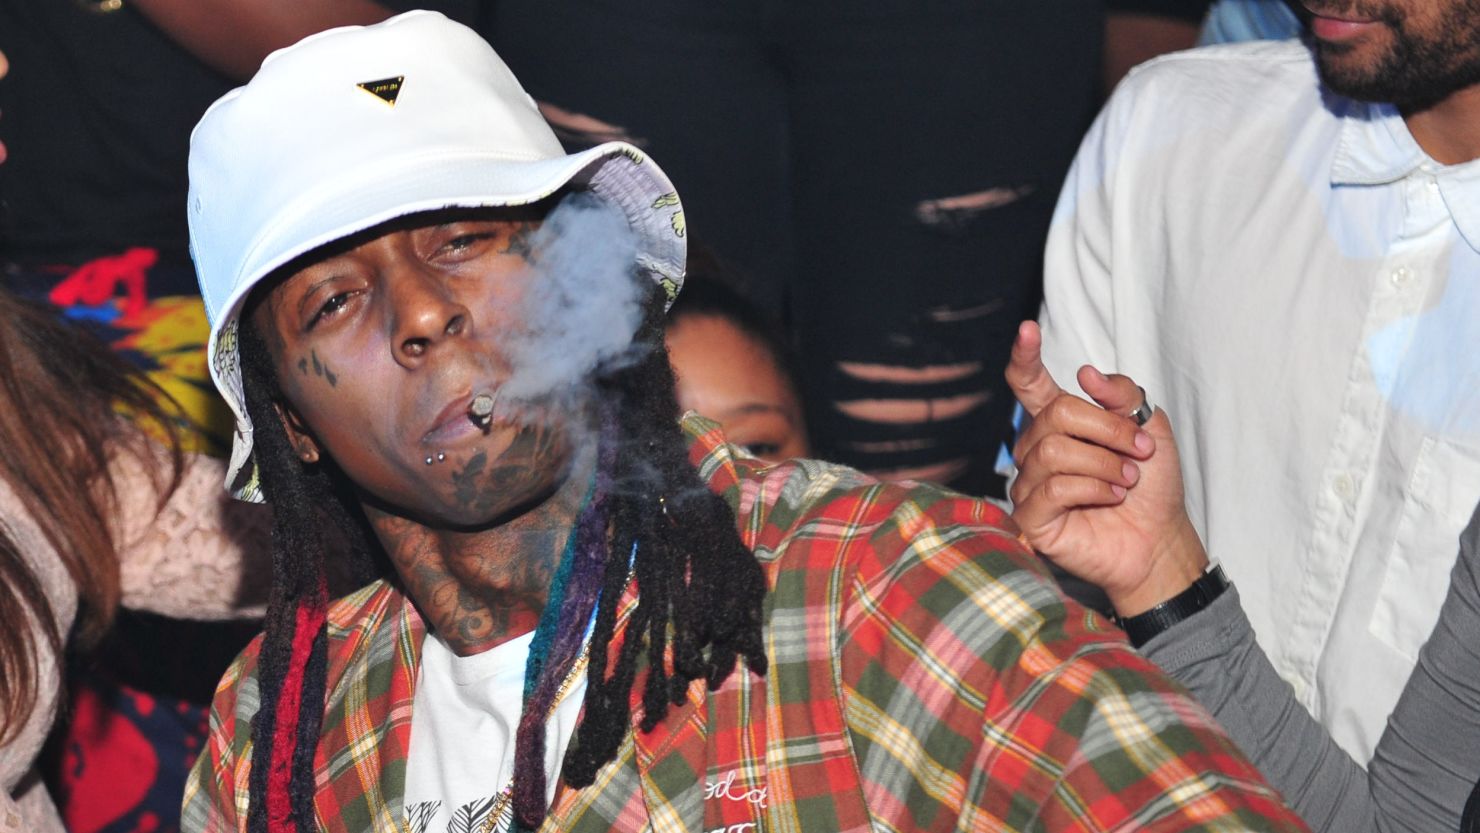 Lil Wayne was in Atlanta for a performance at Compound nightclub Saturday night, hours before gunshots were fired at his tour bus,